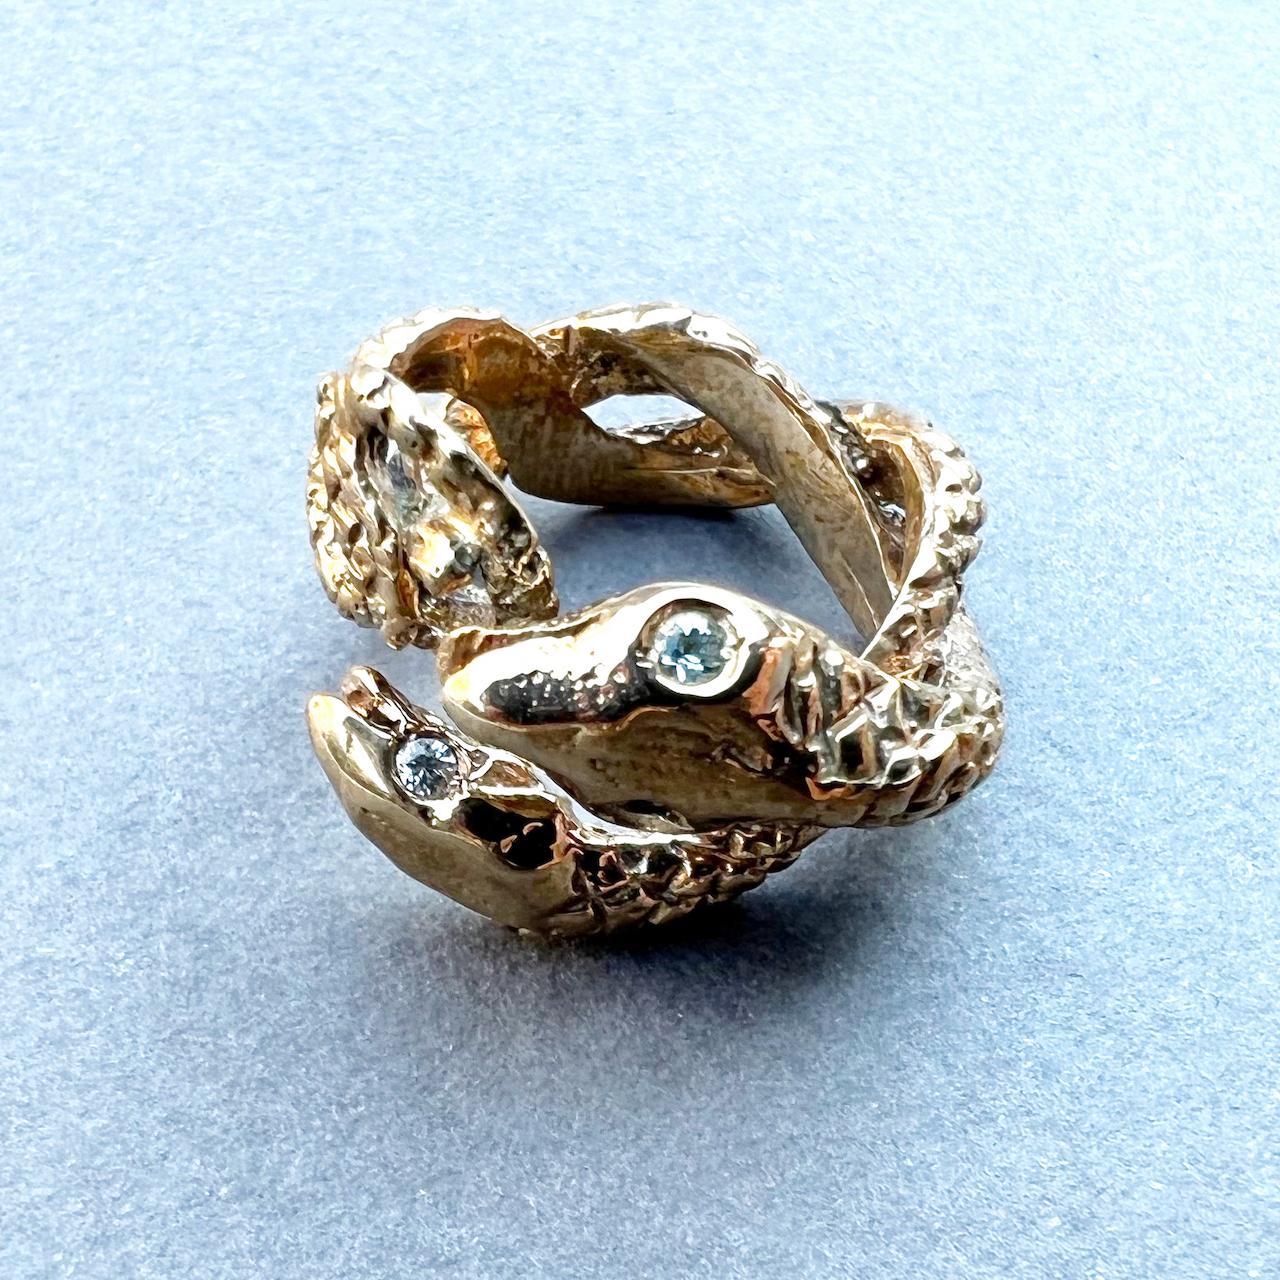 Animal jewelry Aquamarine Snake Ring Bronze Cocktail Ring J Dauphin For Sale 8